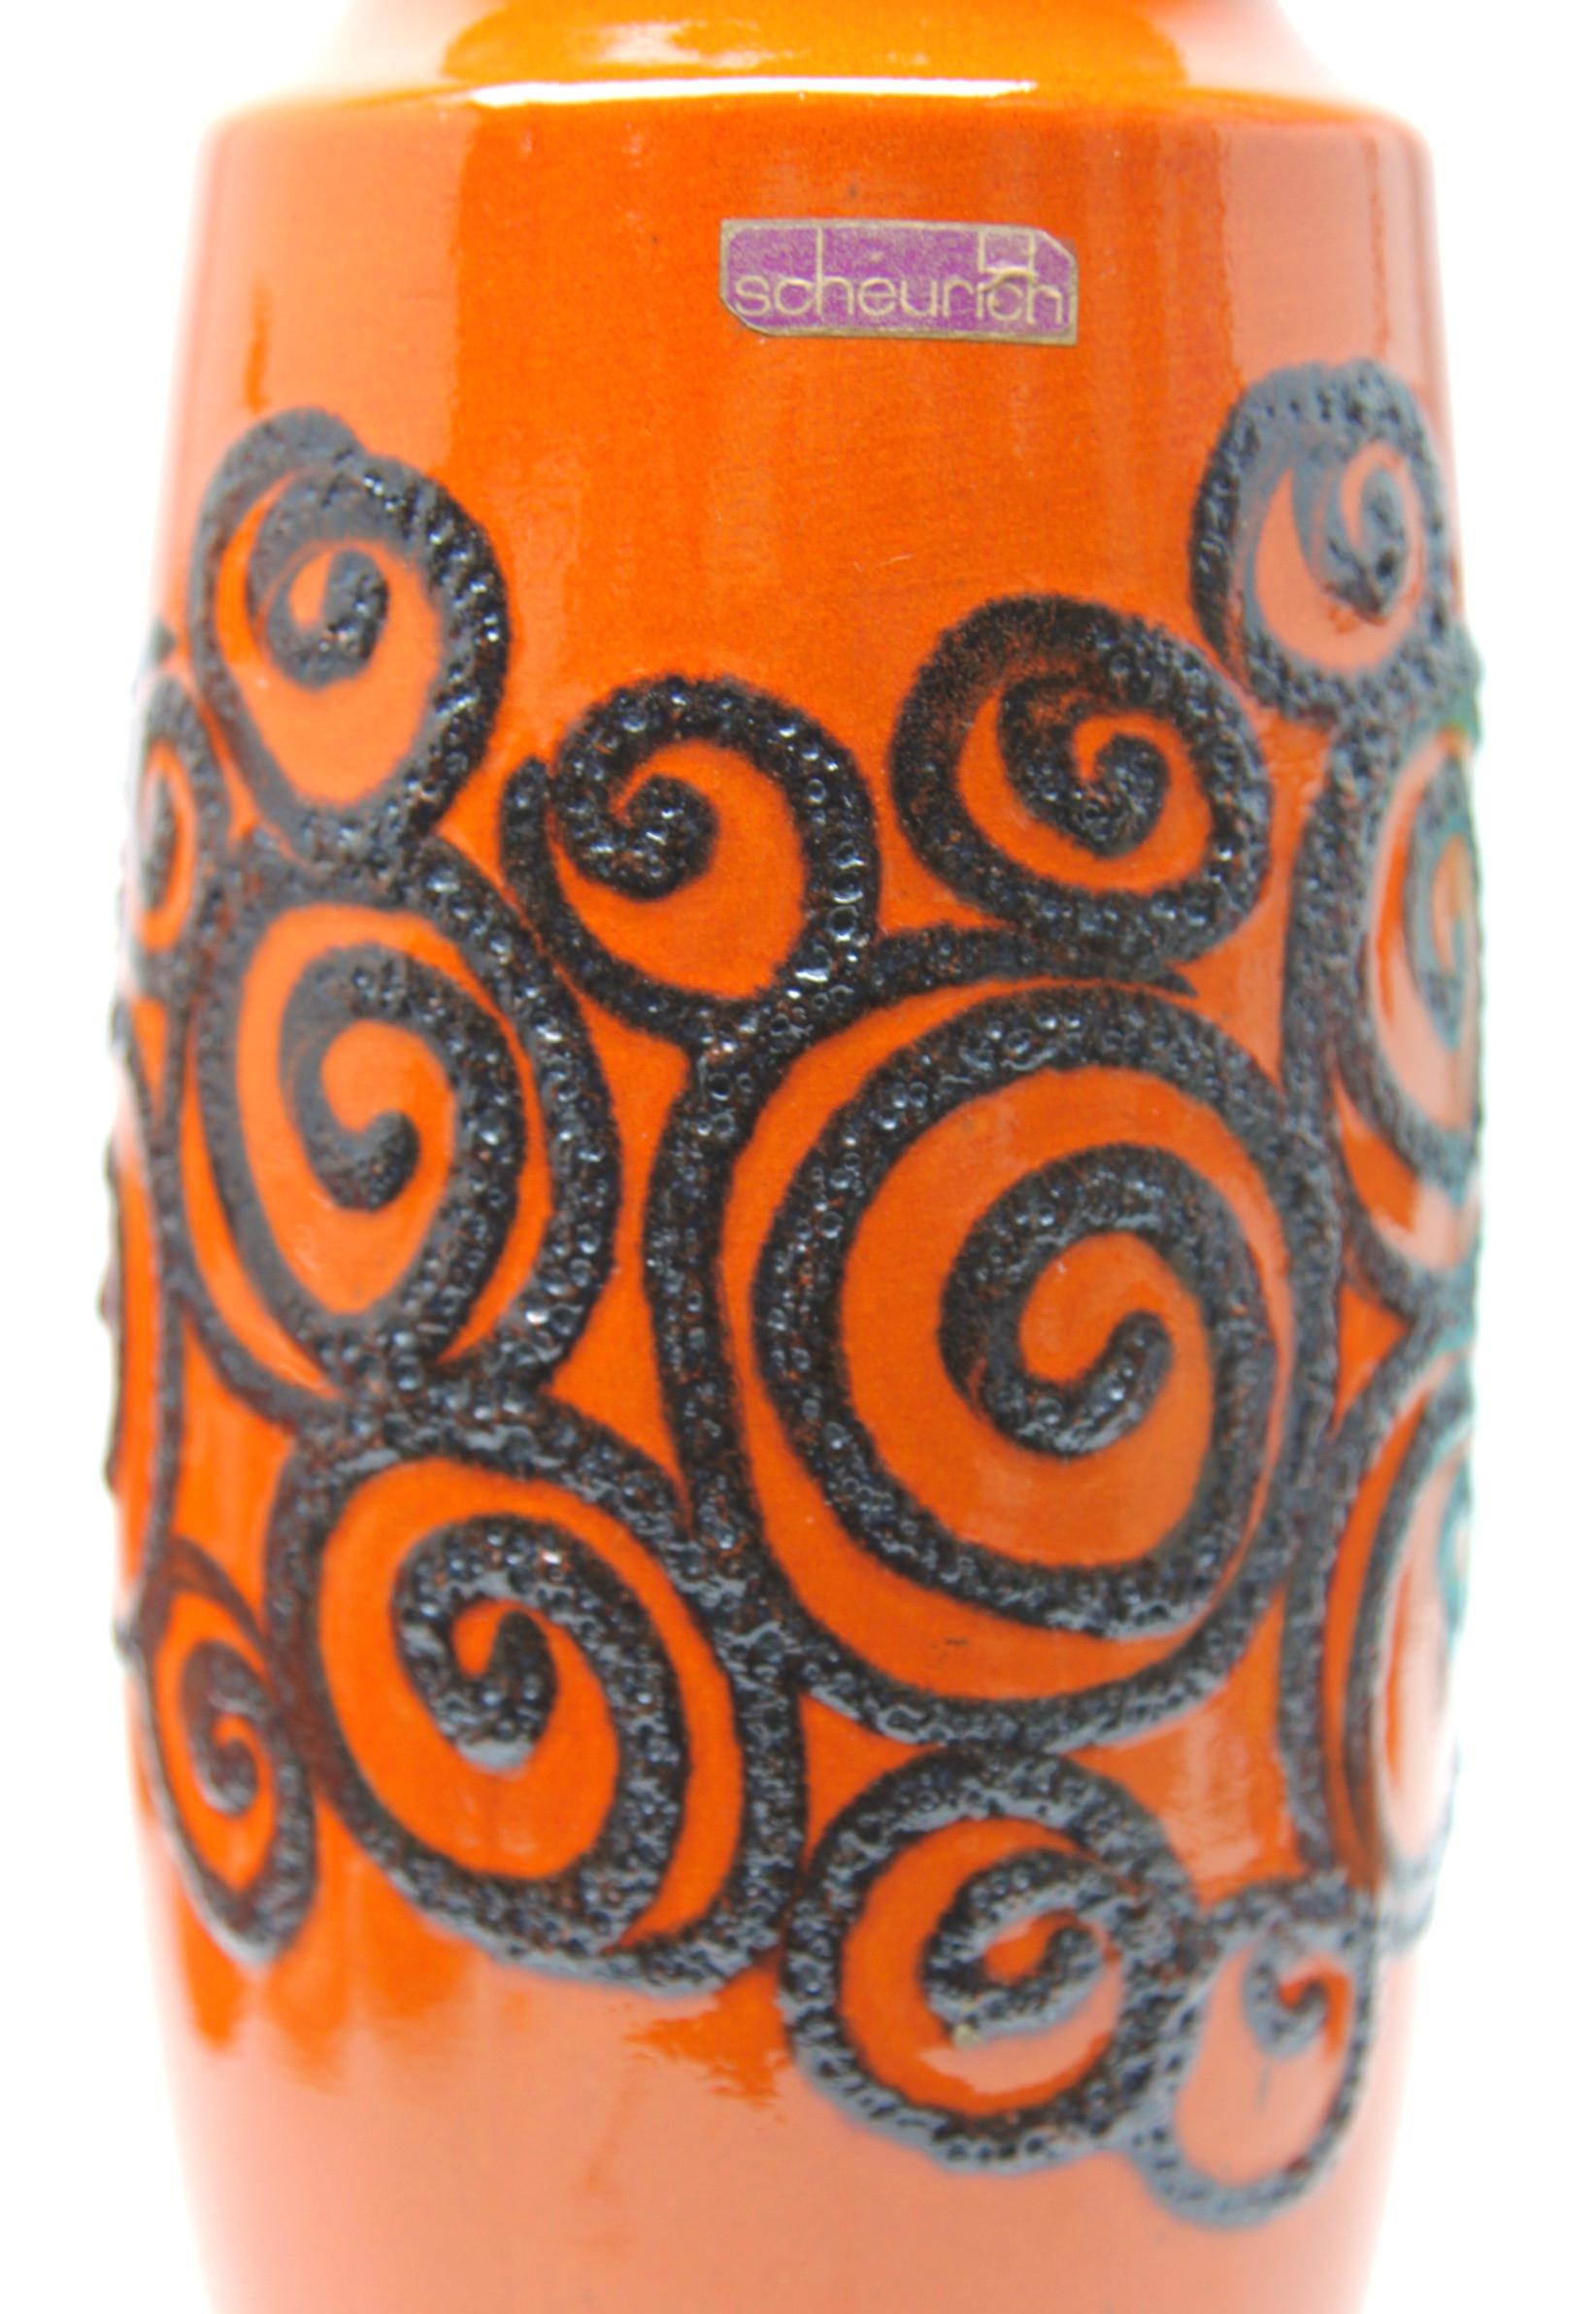 Fat lava vase, vintage Scheurich W-Germany 239-41, dates from 1968, with a satin gloss glaze in 'tango' orange.

With impressed number on base. 239-41, W-Germany.
High relief trail glaze with tribalist /primitivist inspiration.

The piece is in